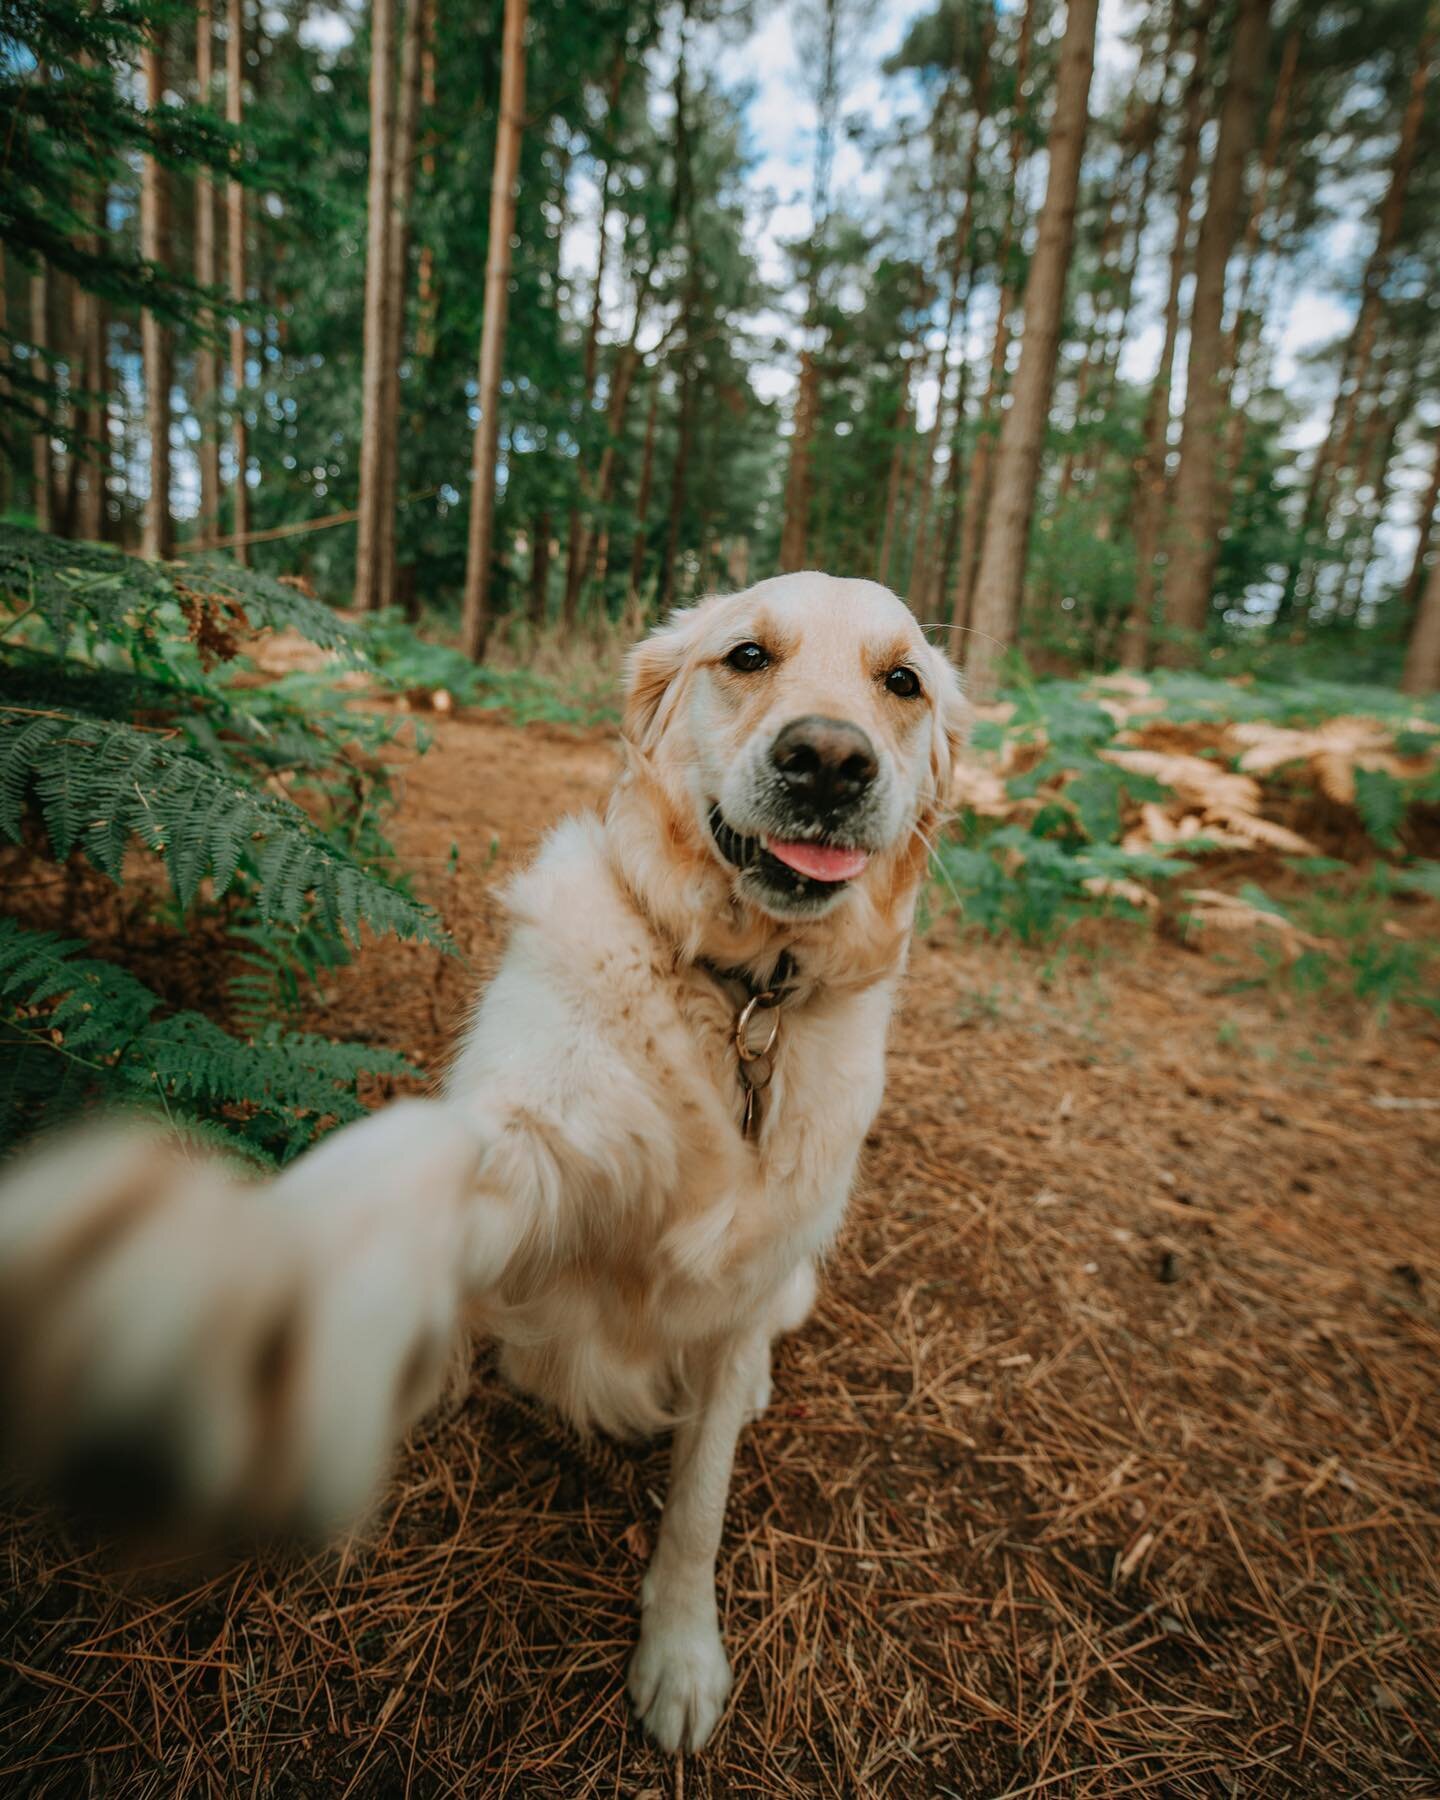 These woods are PAWfection 🐾🌲 Do any of your pups have a favourite trick to do? Lulu&rsquo;s is &ldquo;meerkat&rdquo; which is her version of sit pretty 😂 #tot ⁣⁣⁣
⁣⁣⁣
⁣⁣
⁣⁣
⁣⁣
⁣⁣⁣
⁣⁣⁣
⁣⁣⁣
⁣⁣⁣
⁣⁣⁣
#doggosbeingdoggos #happydoggo #dogsthathike #hiki